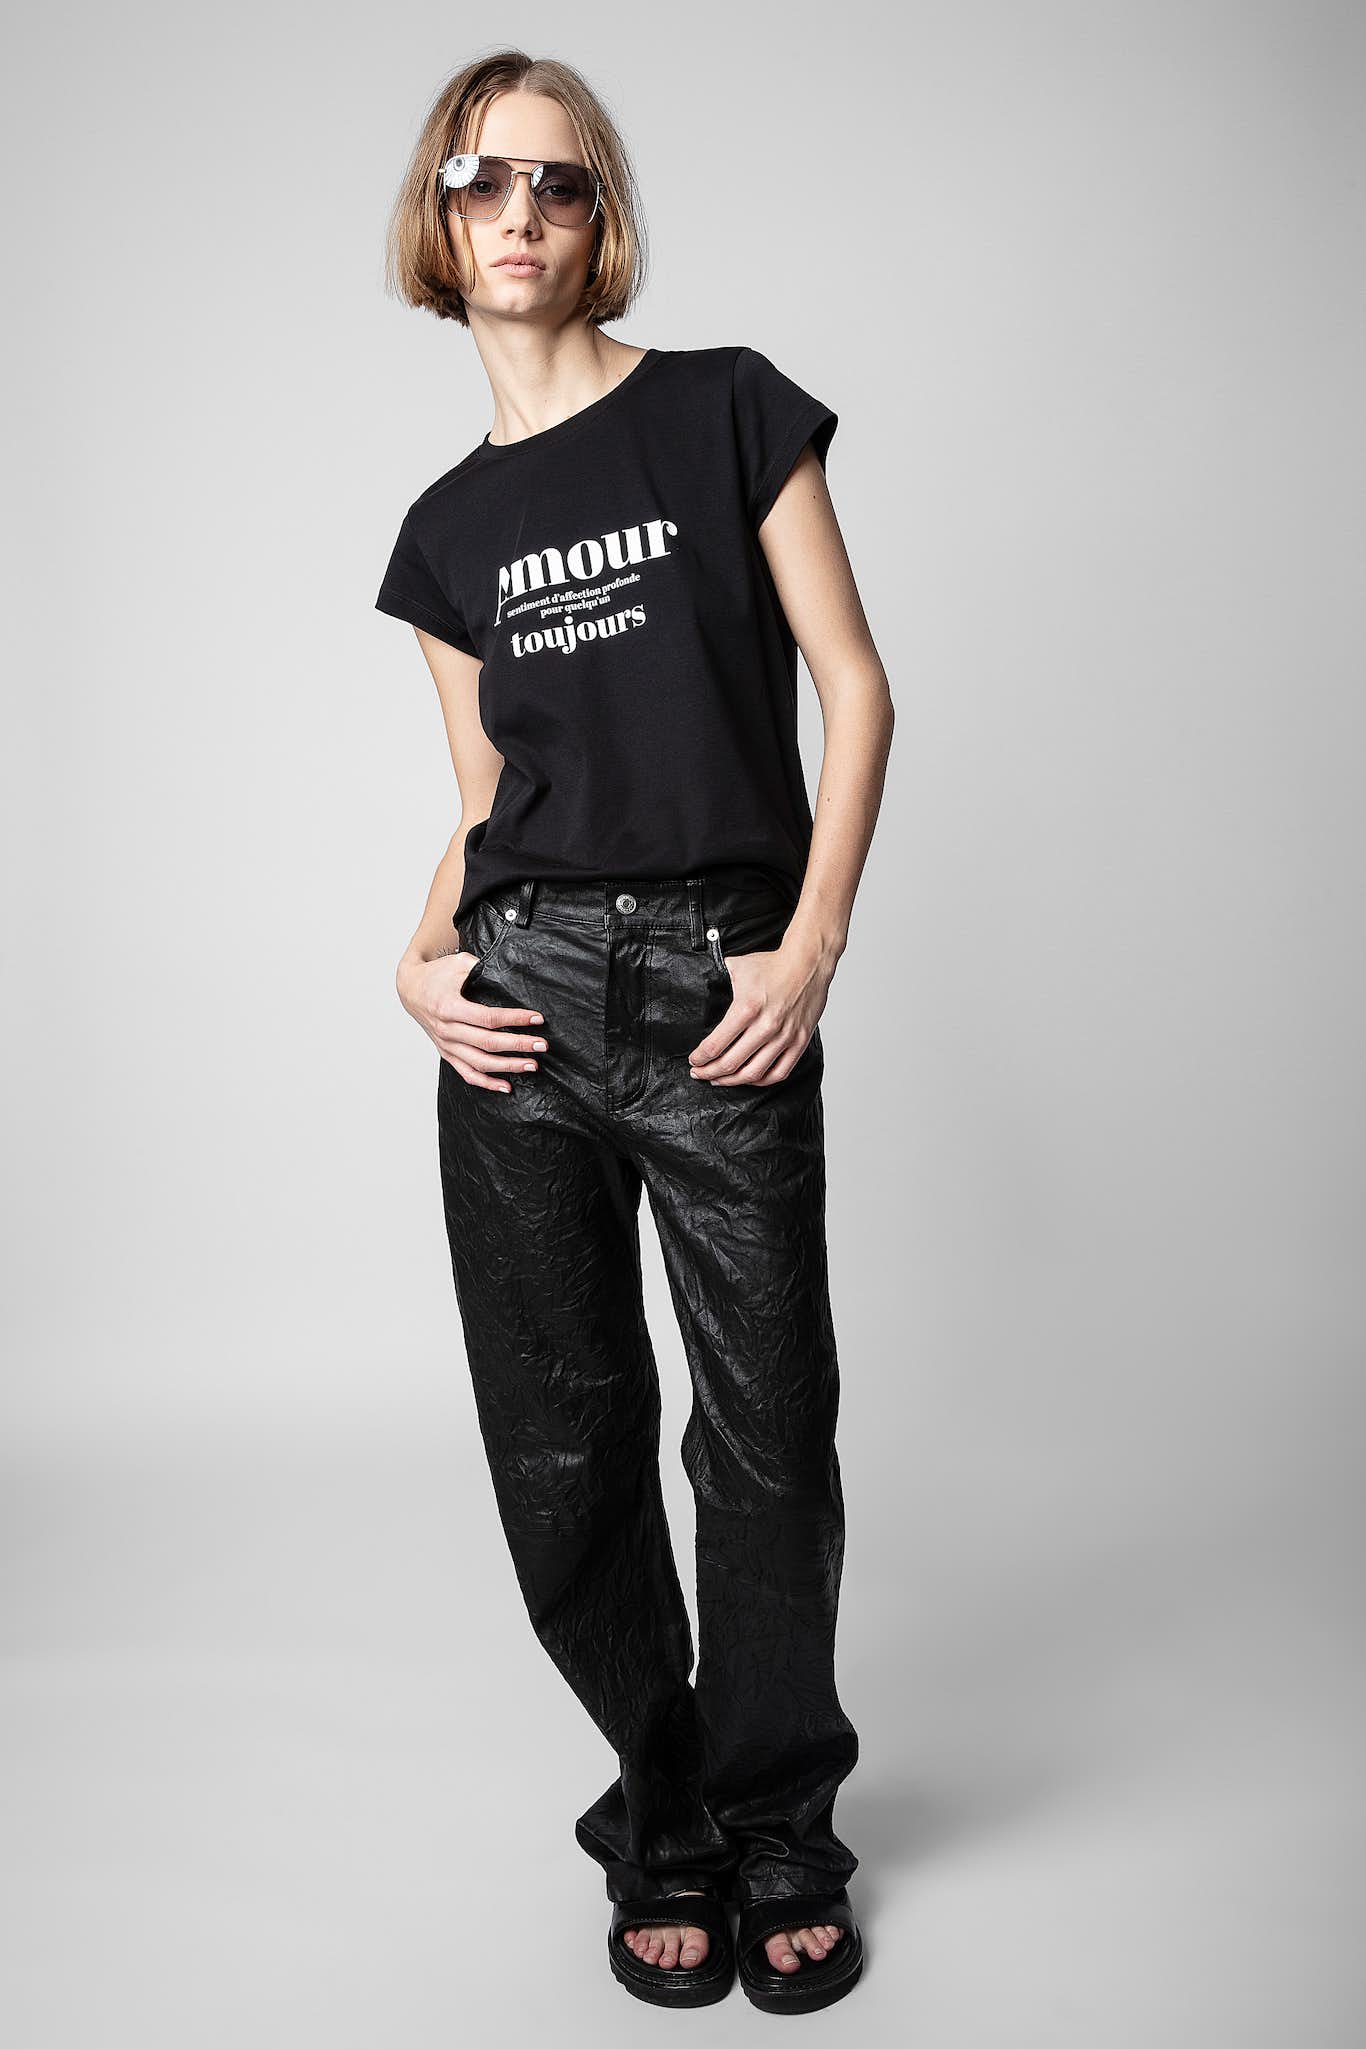 Zadig & Voltaire T-Shirt Amour Toujours